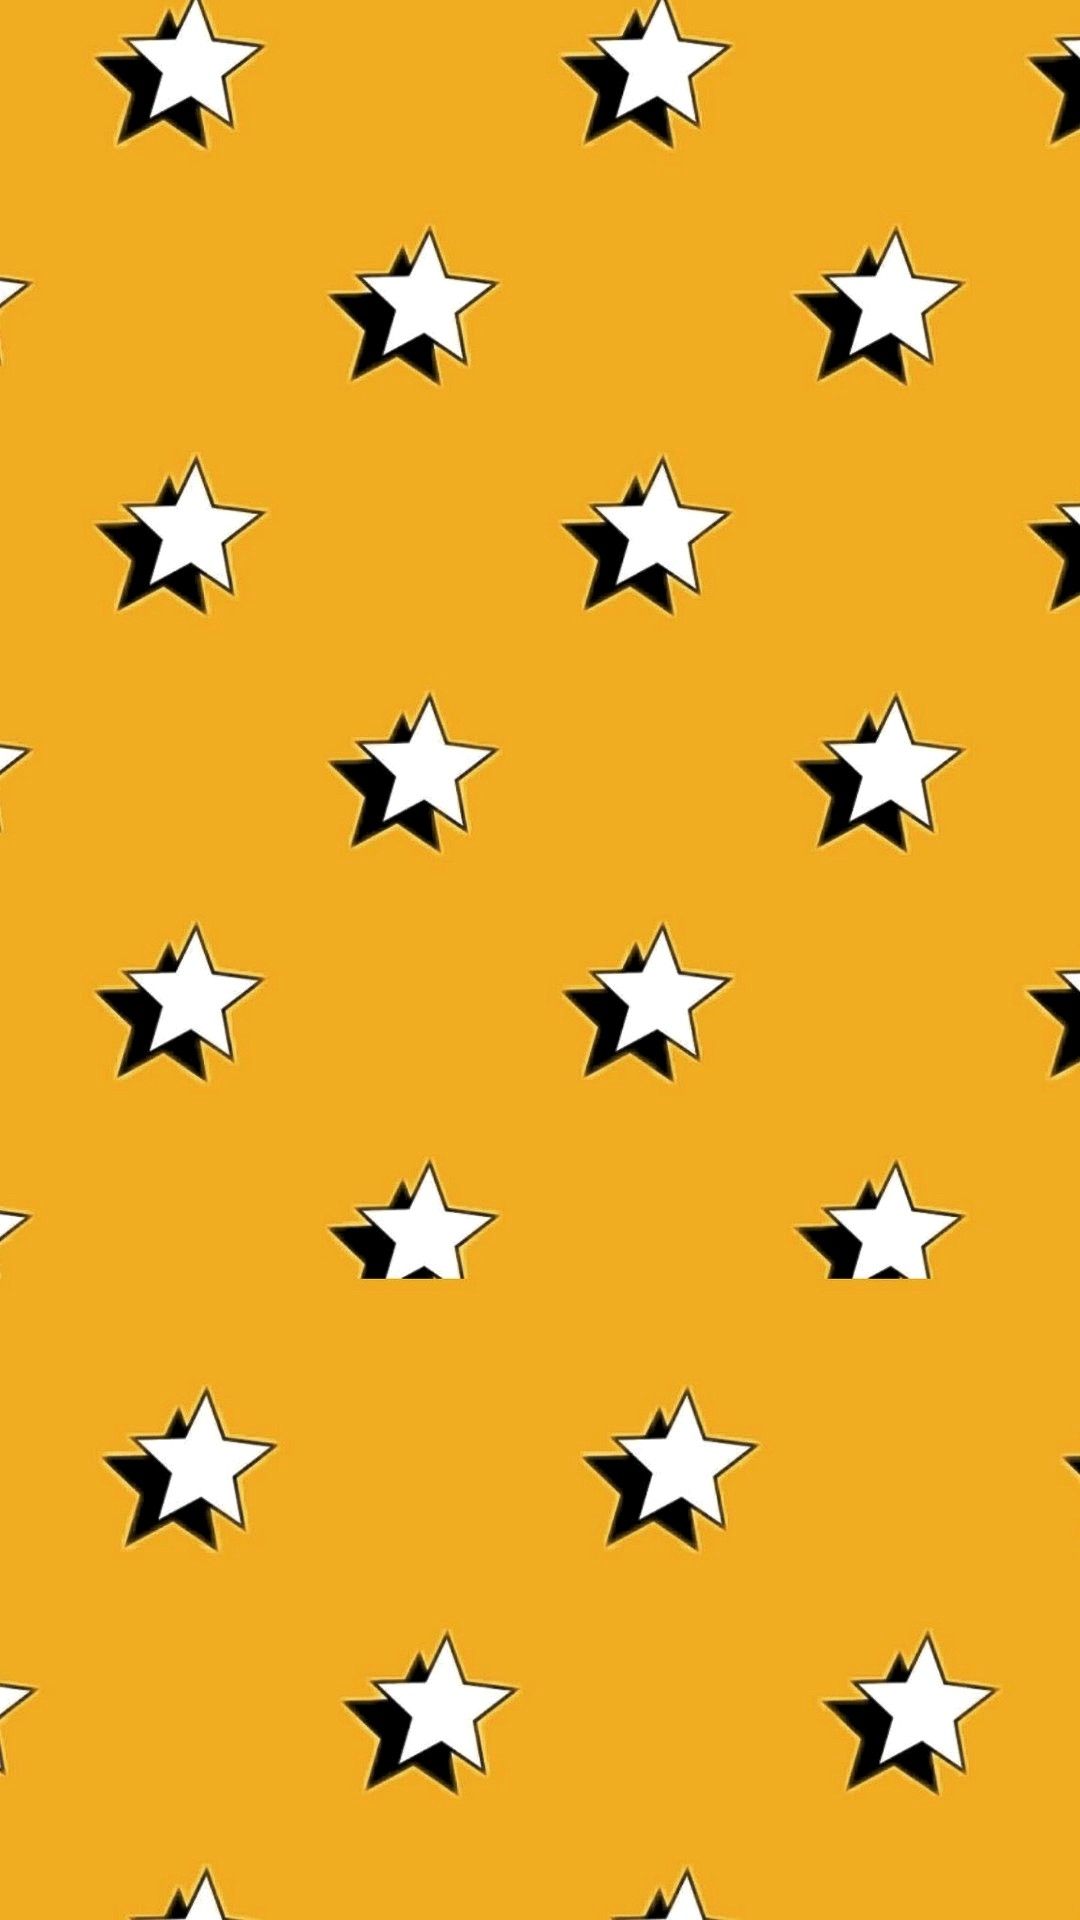 A yellow background with white stars - Stars, phone, pattern